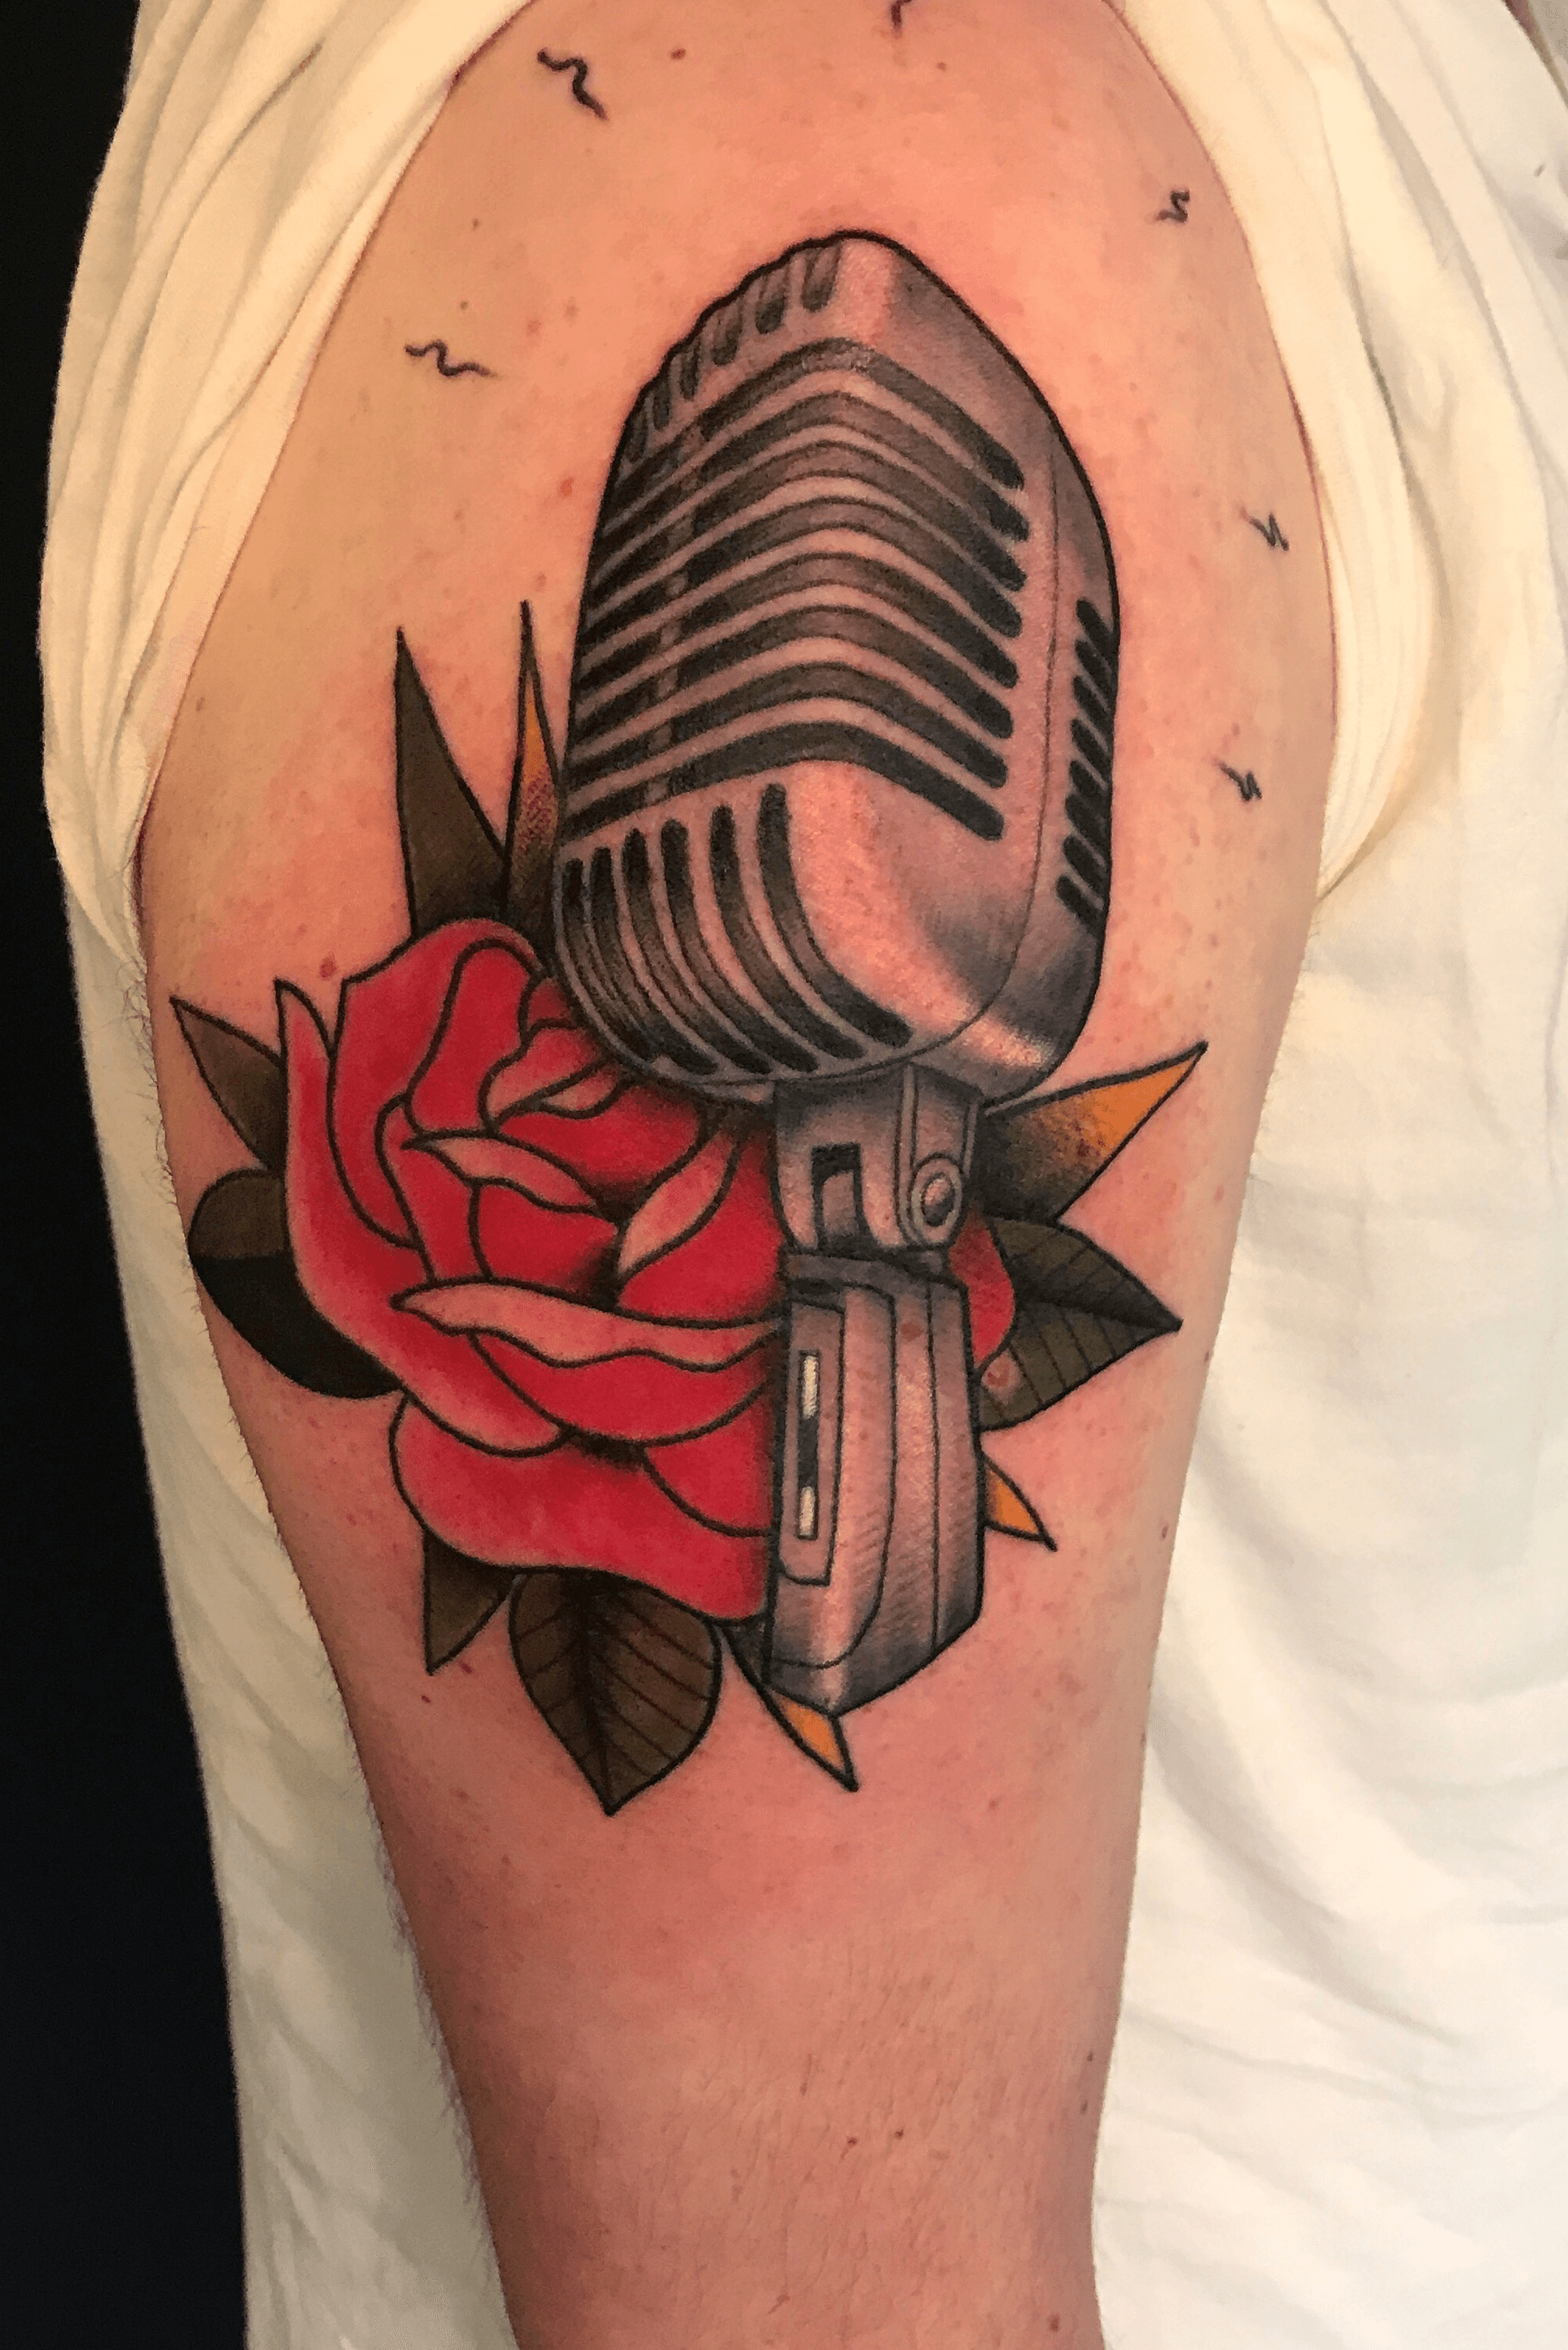 New school microphone tattoo on the inner forearm